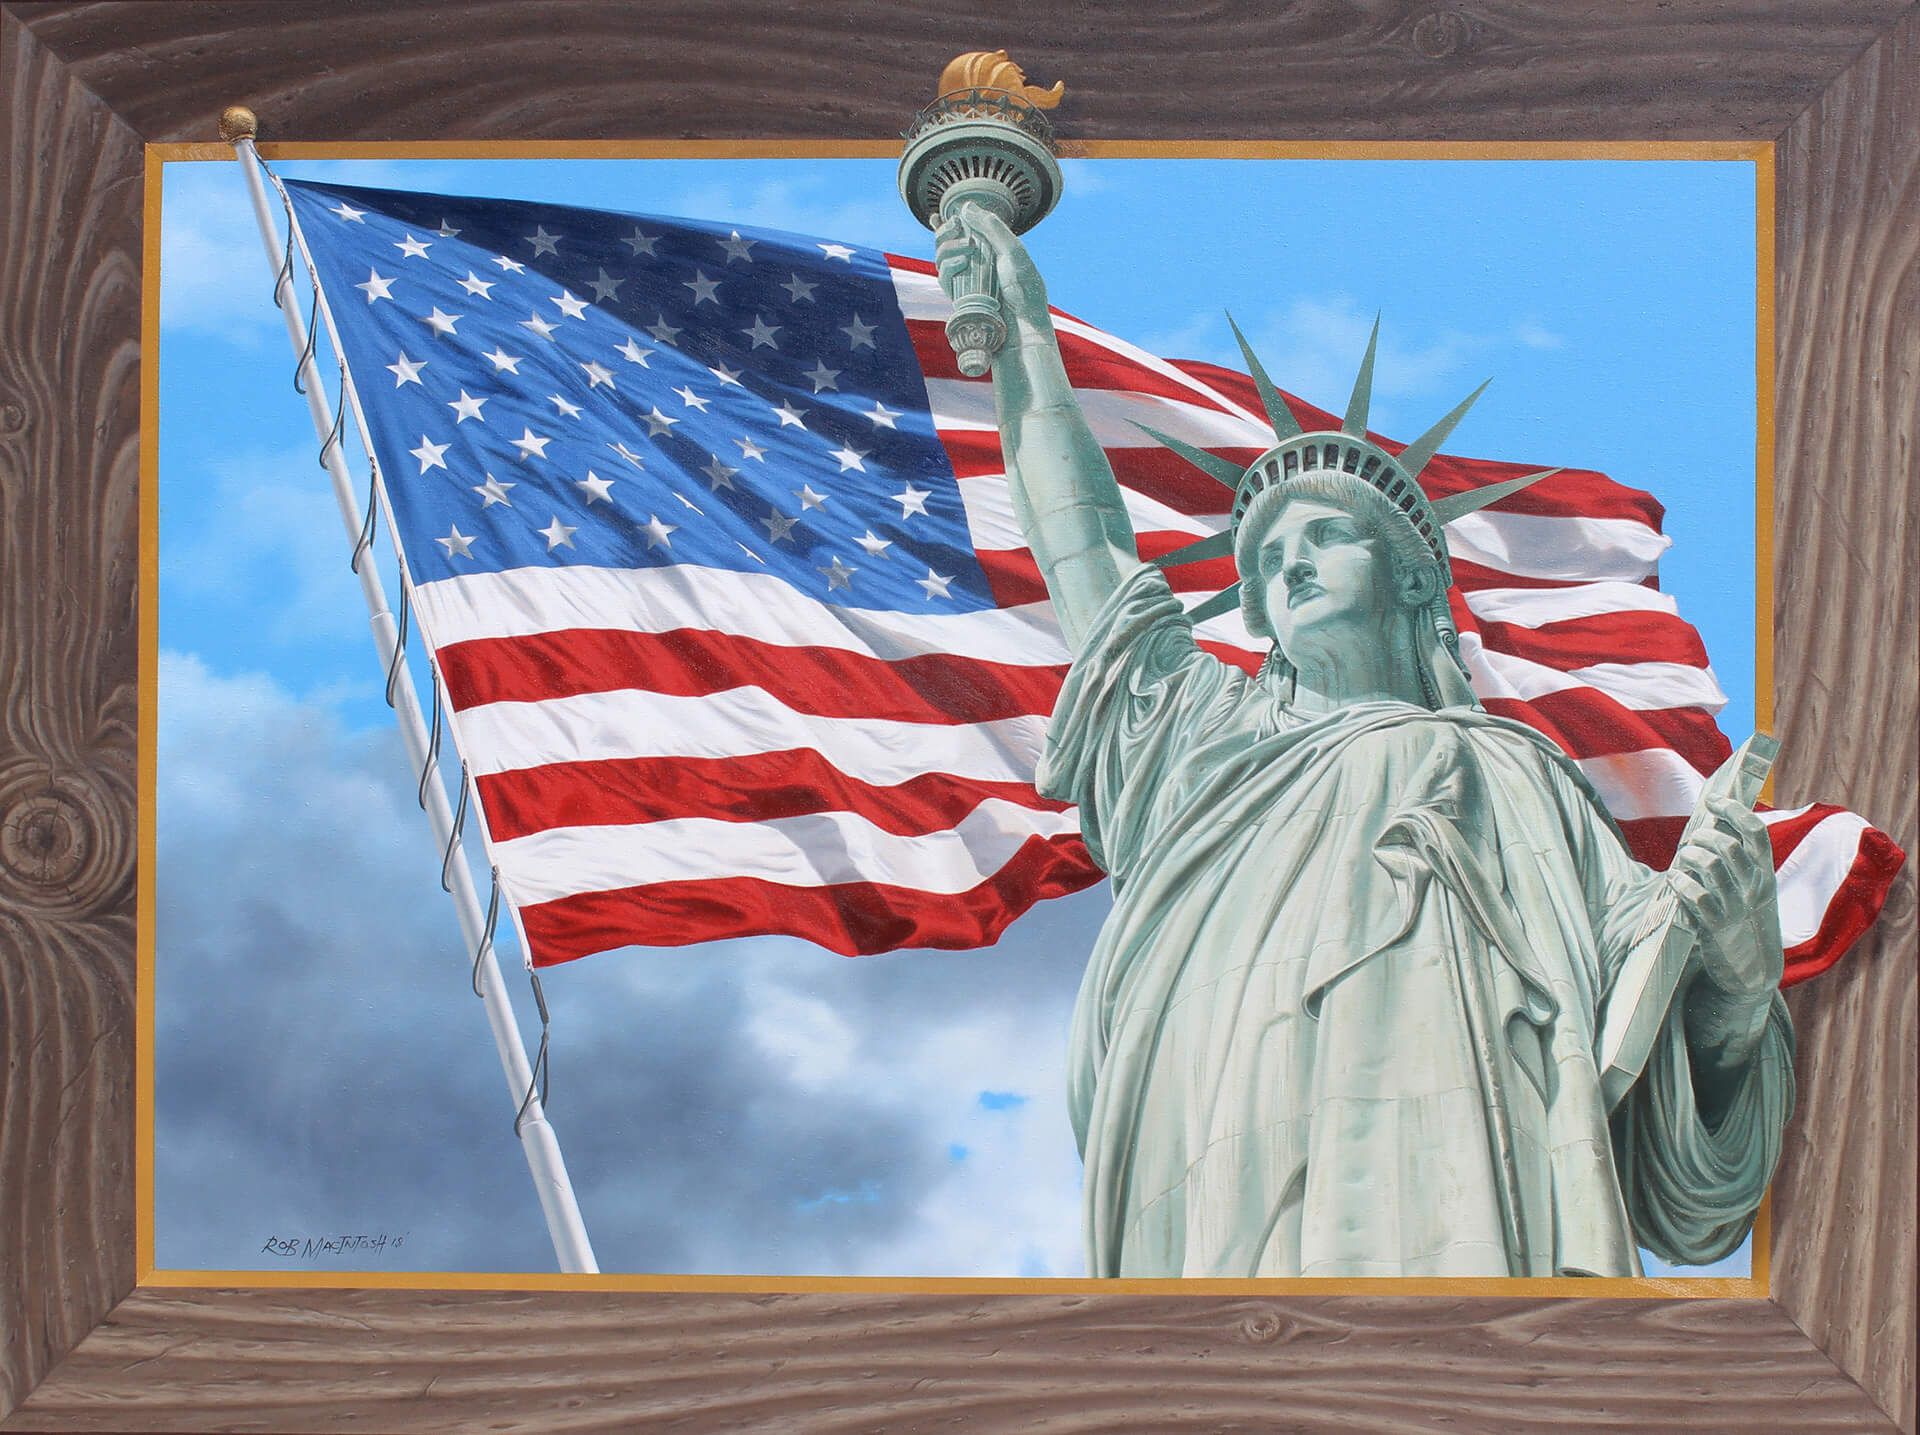 Photorealistic painting of the American flag and the Statue of Liberty